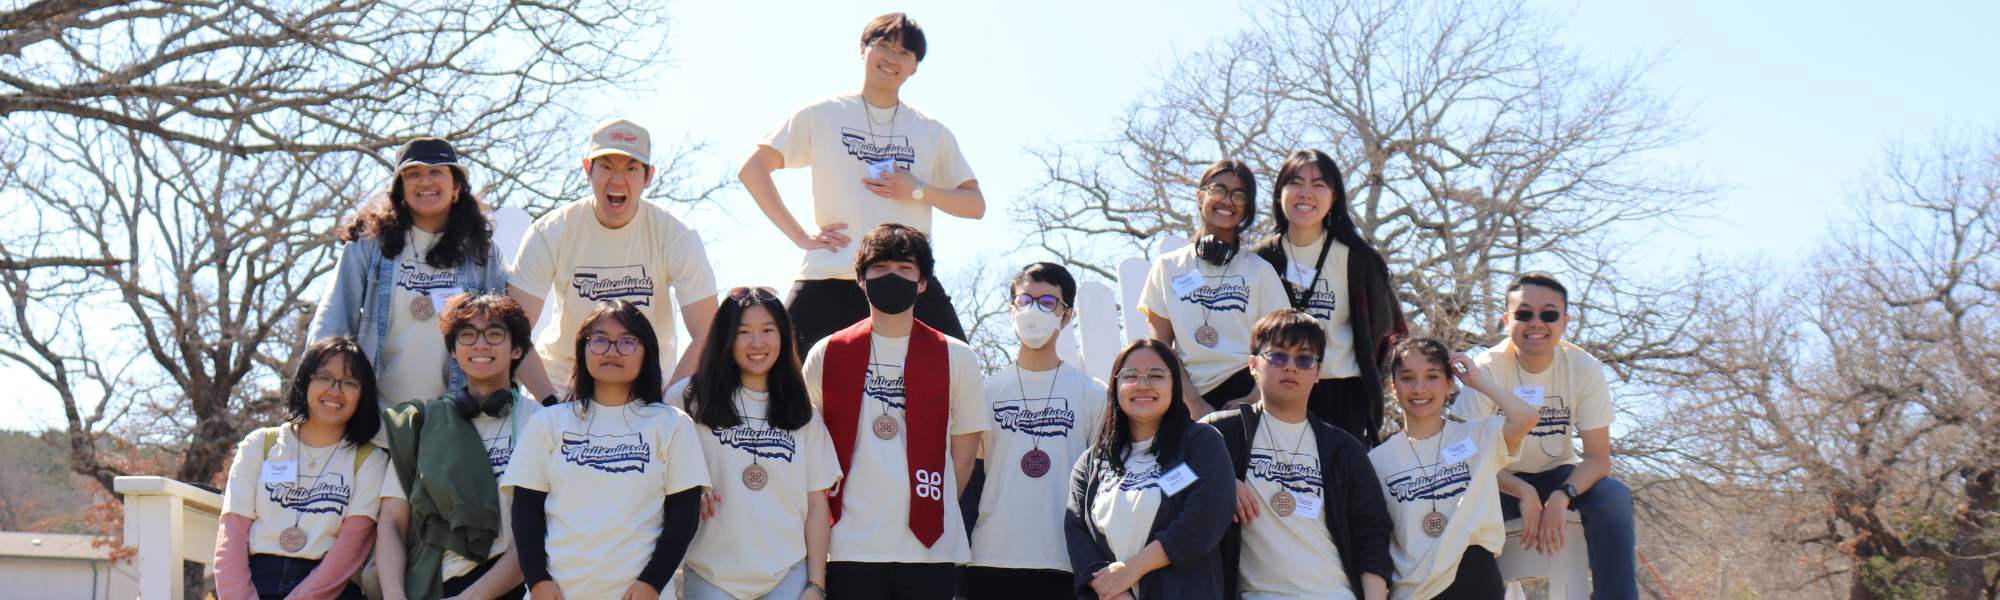 The Asian American Student Association executive team at a retreat.